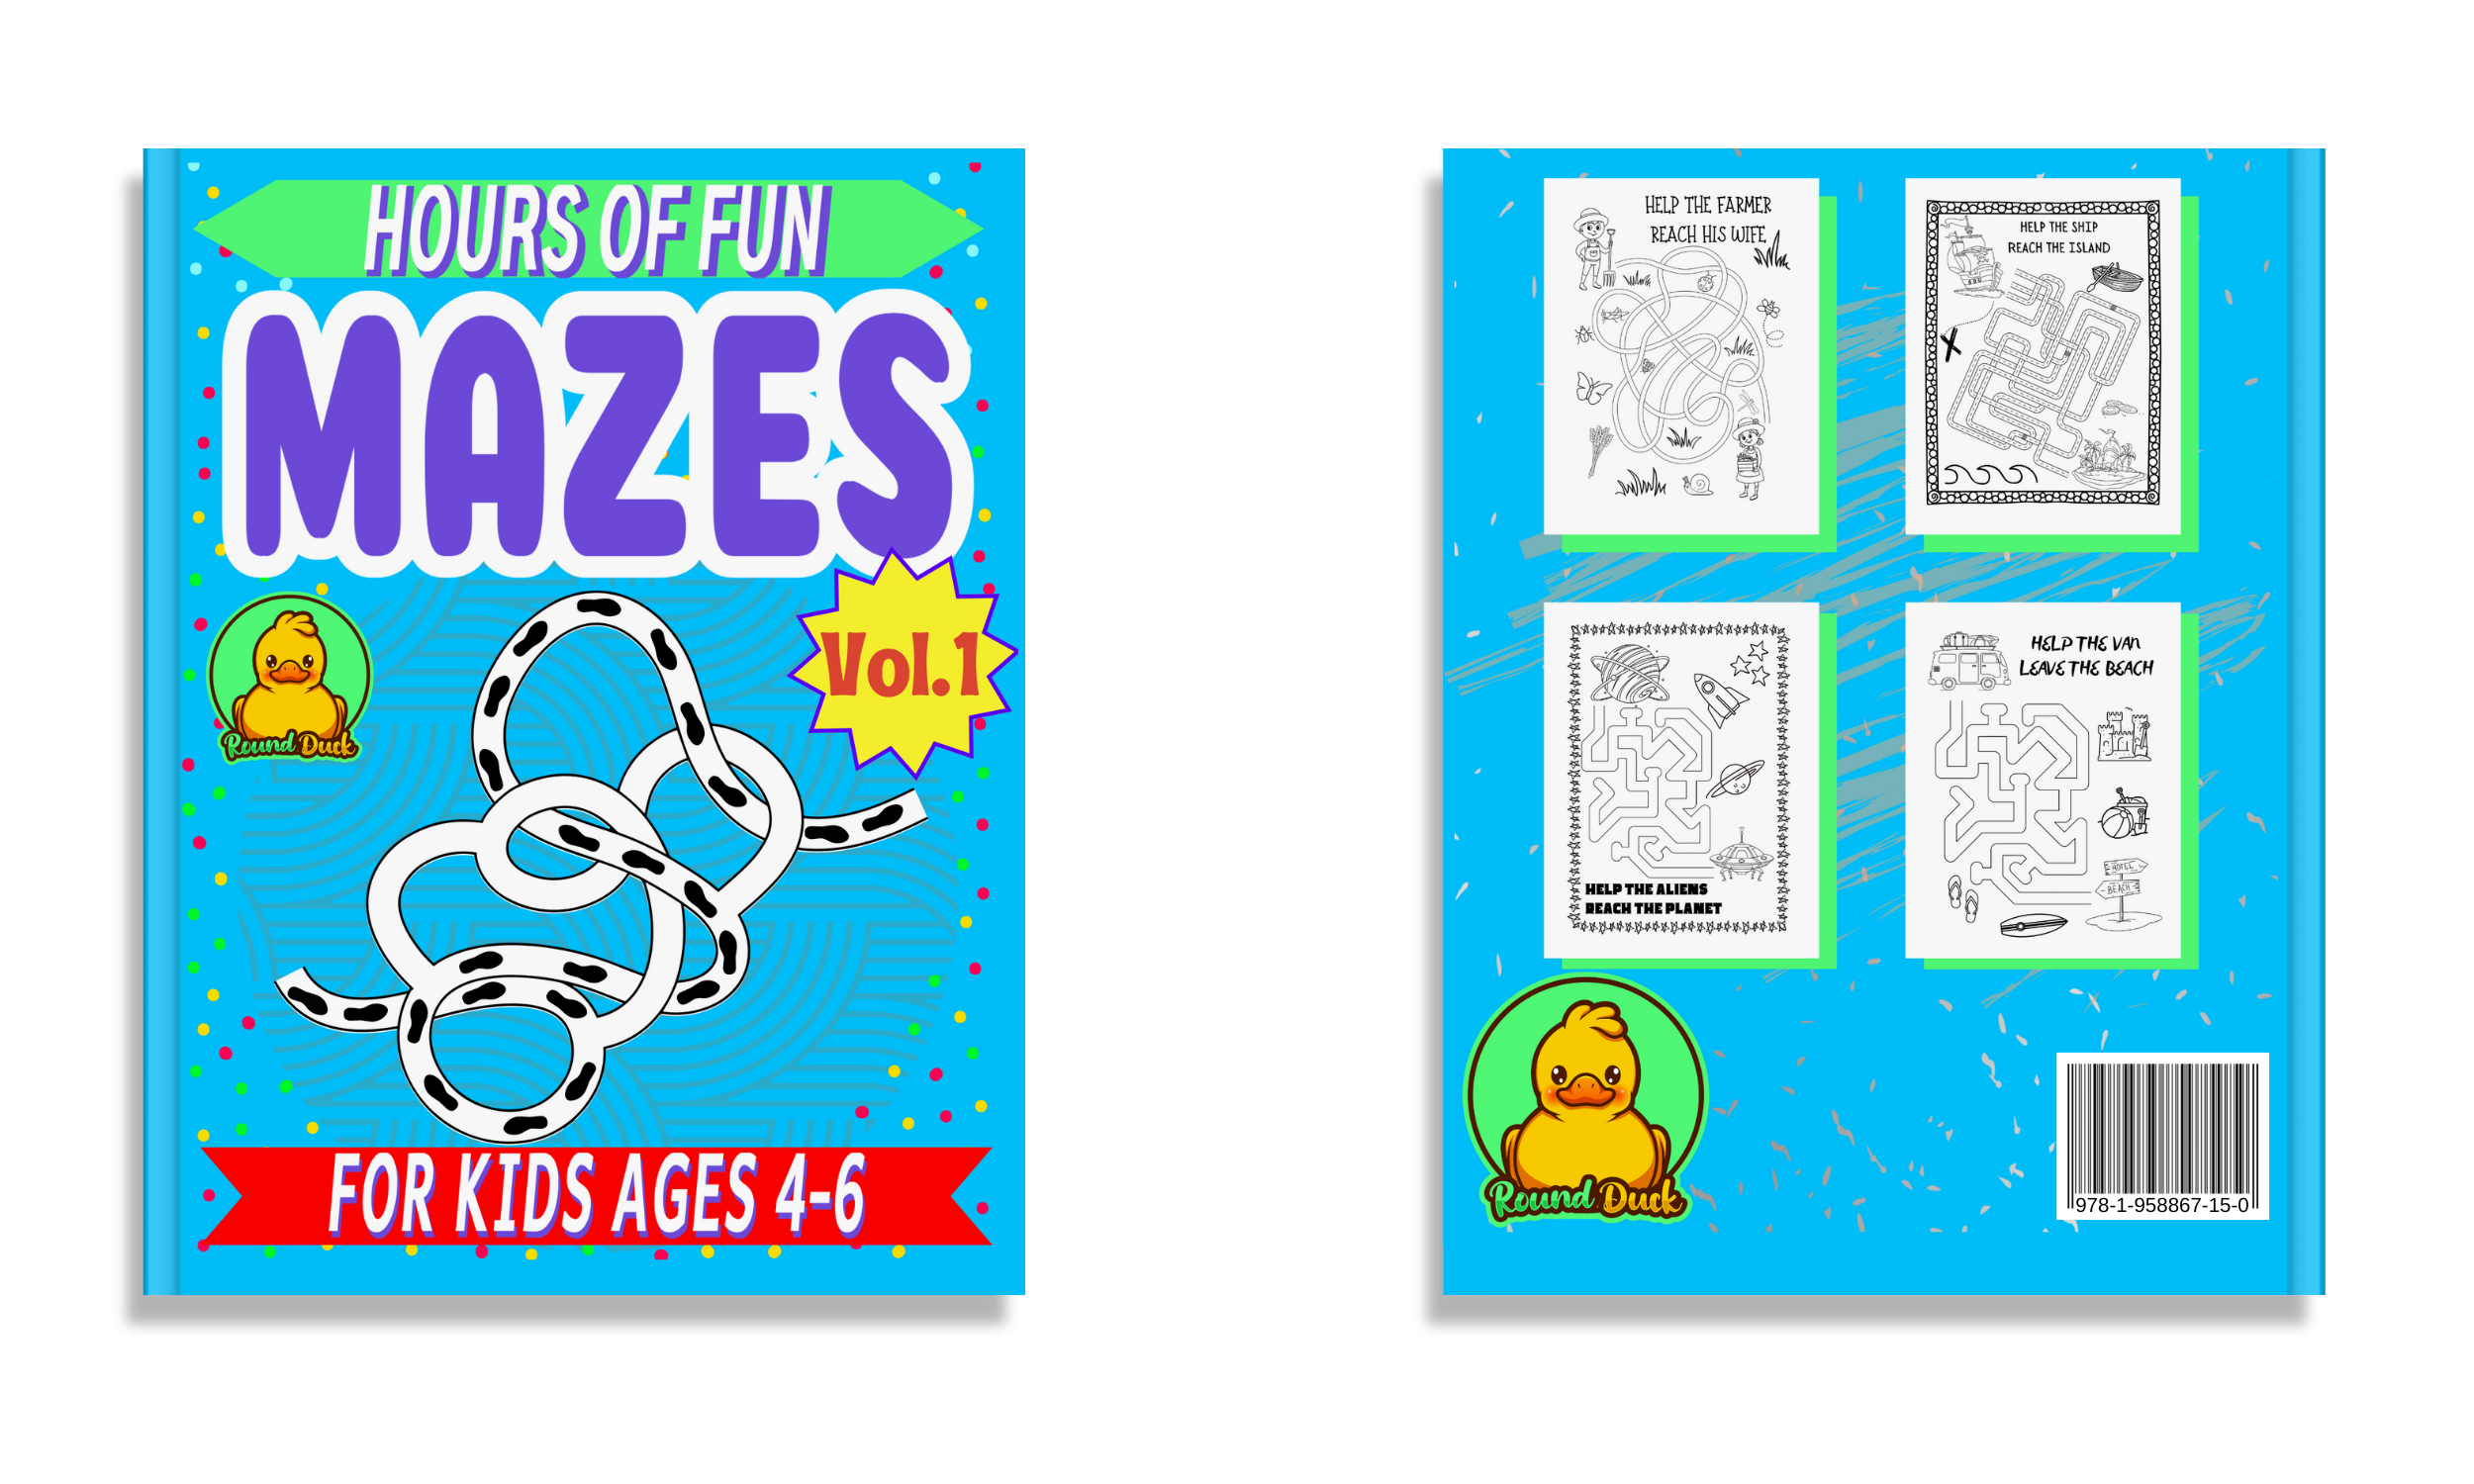 Hours of Fun Mazes for Kids Ages 4-6 Vol-1 By Round Duck ✓